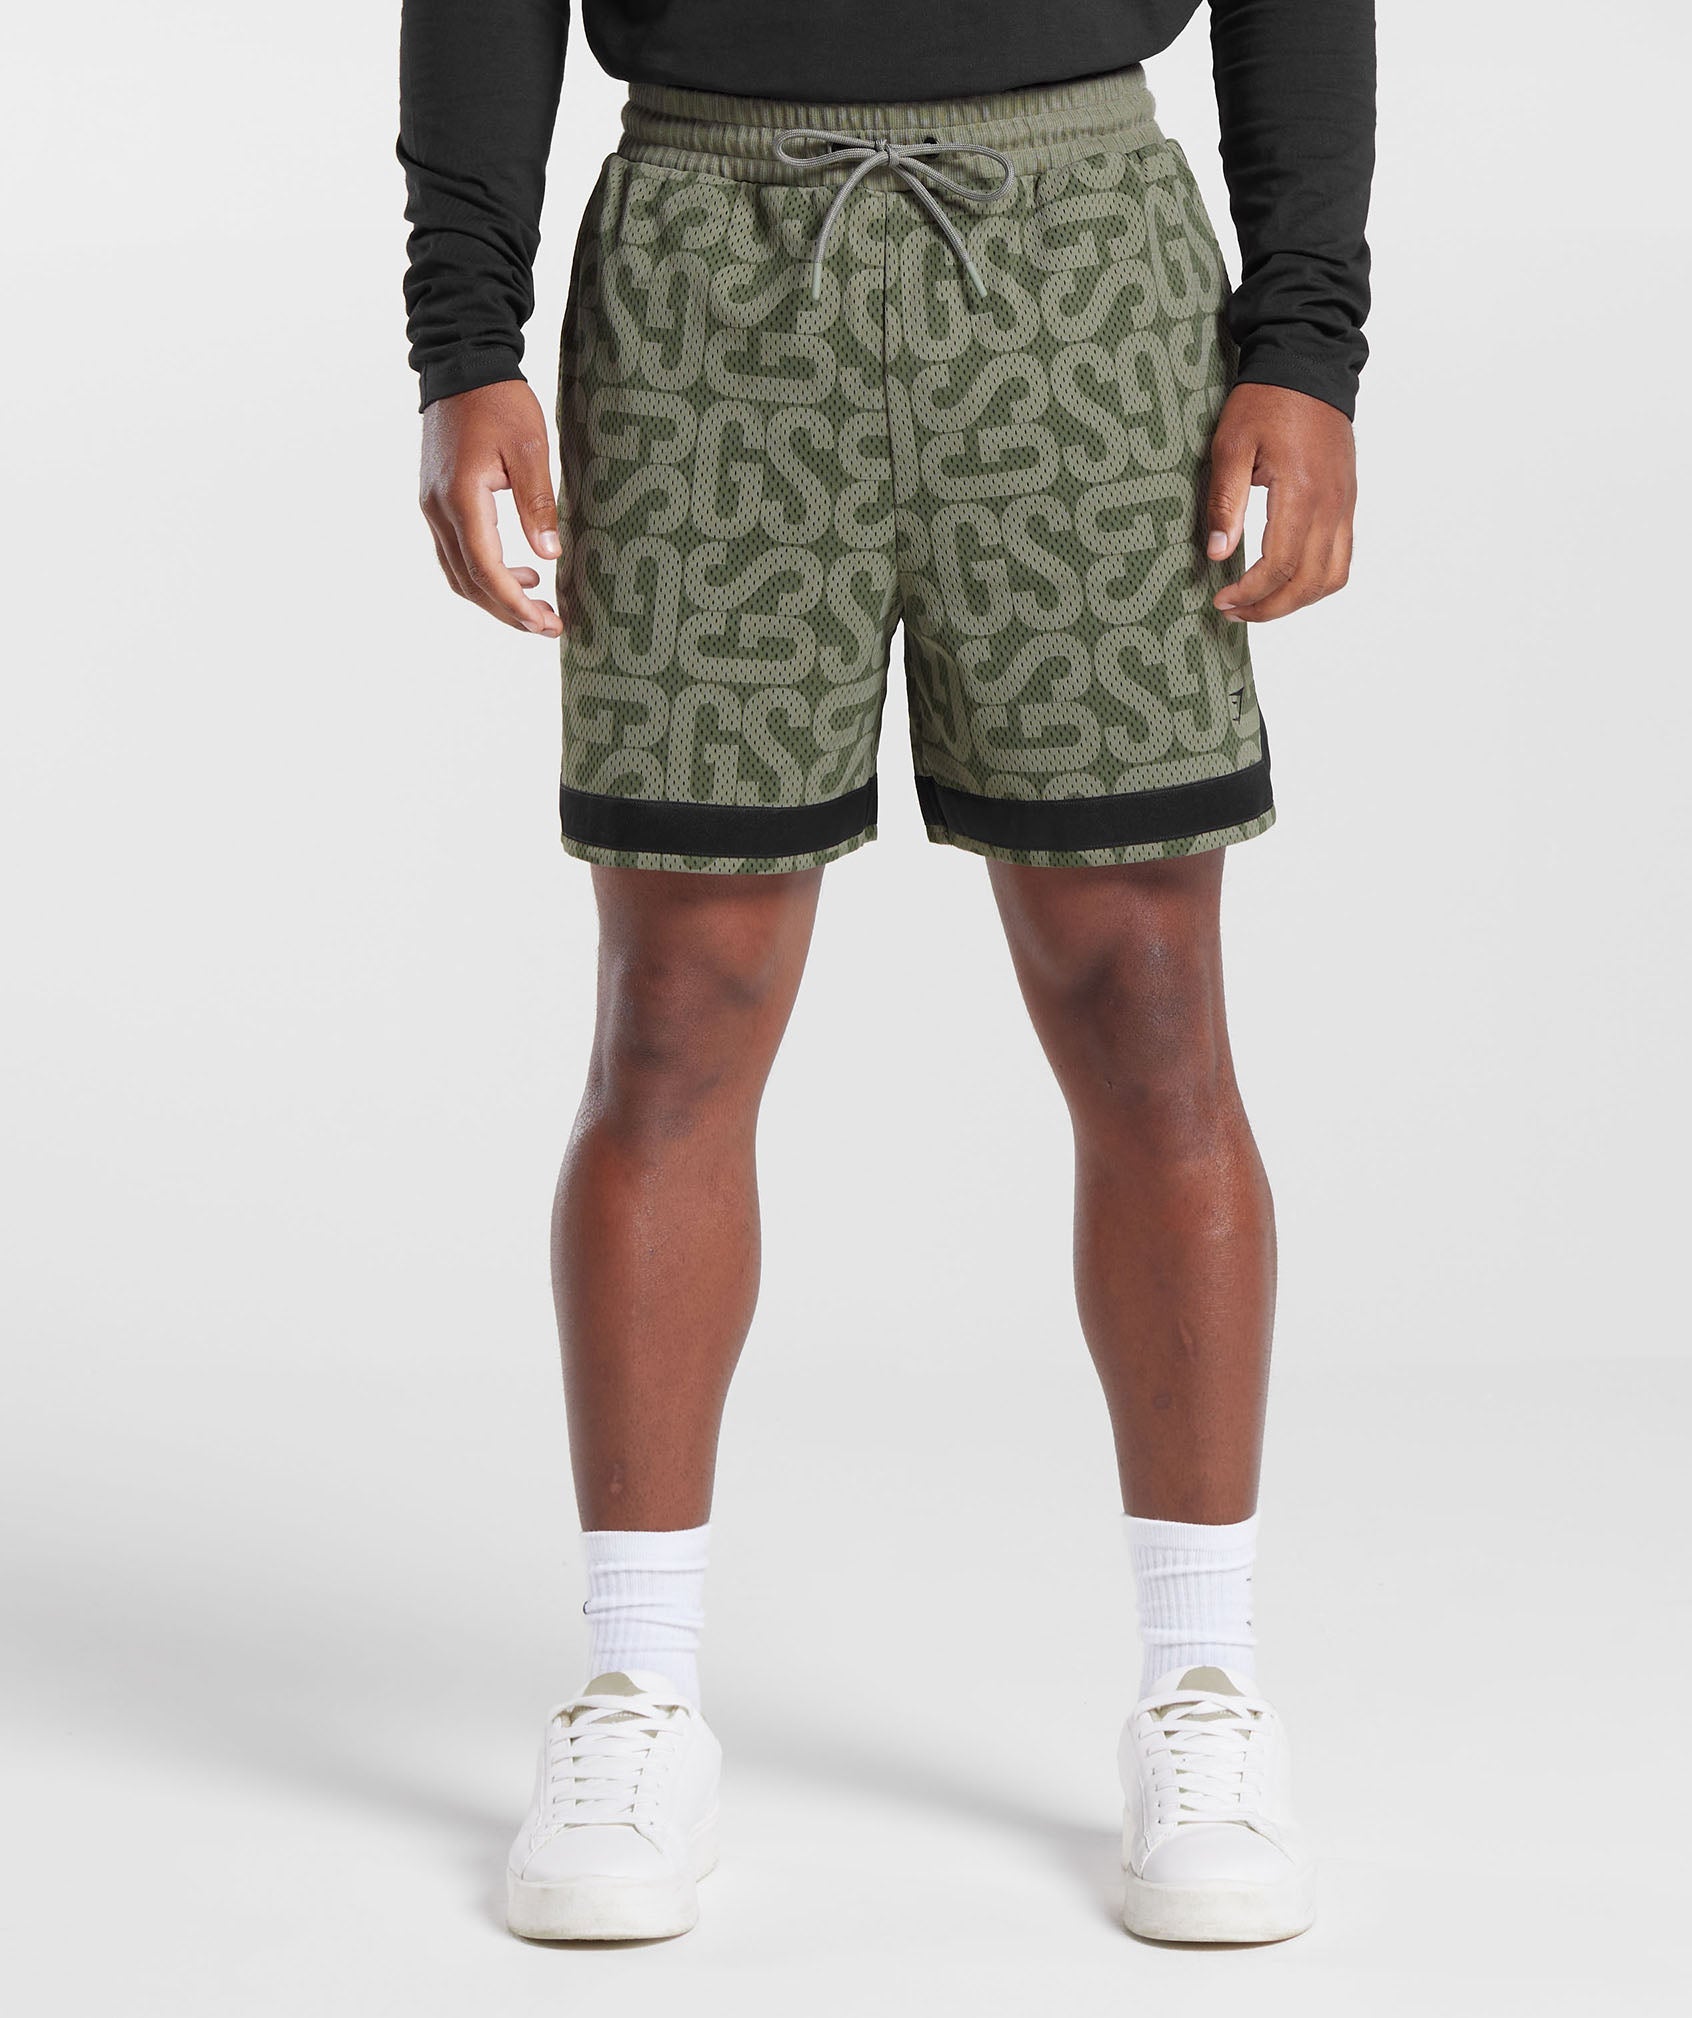 Rest Day Shorts in Dusty Olive